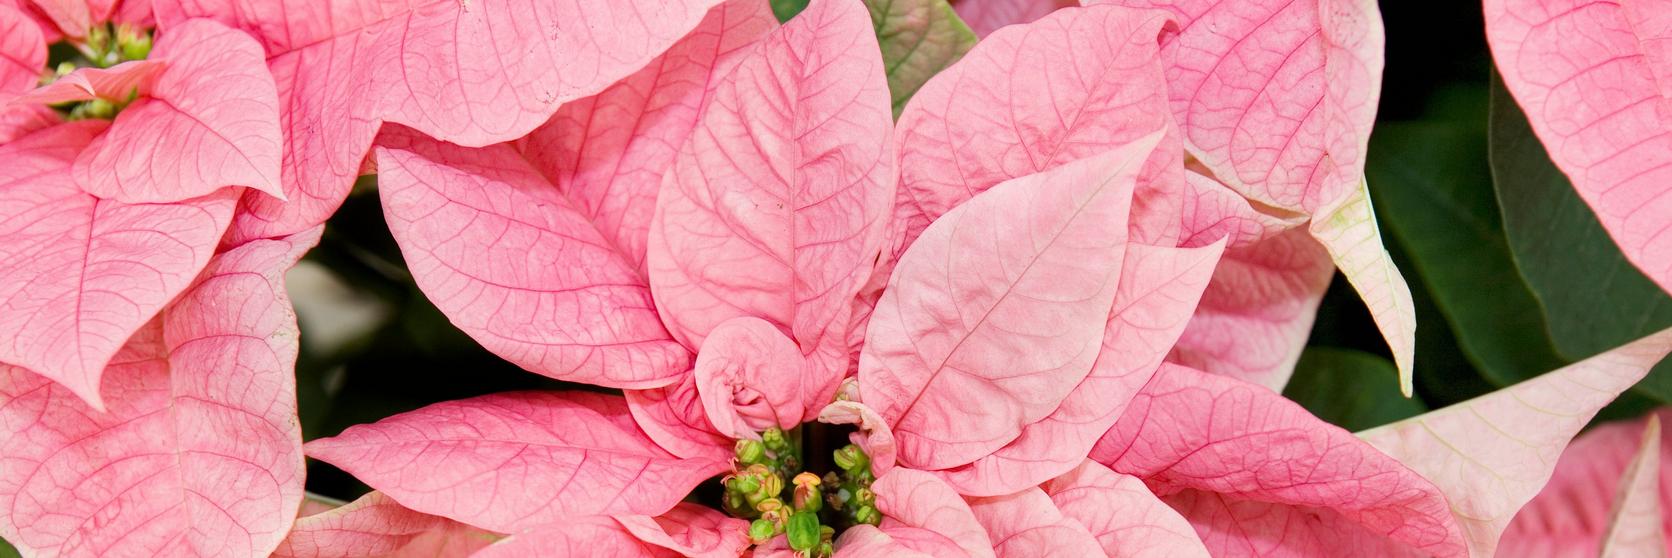 Group_of_pink_poinsettia